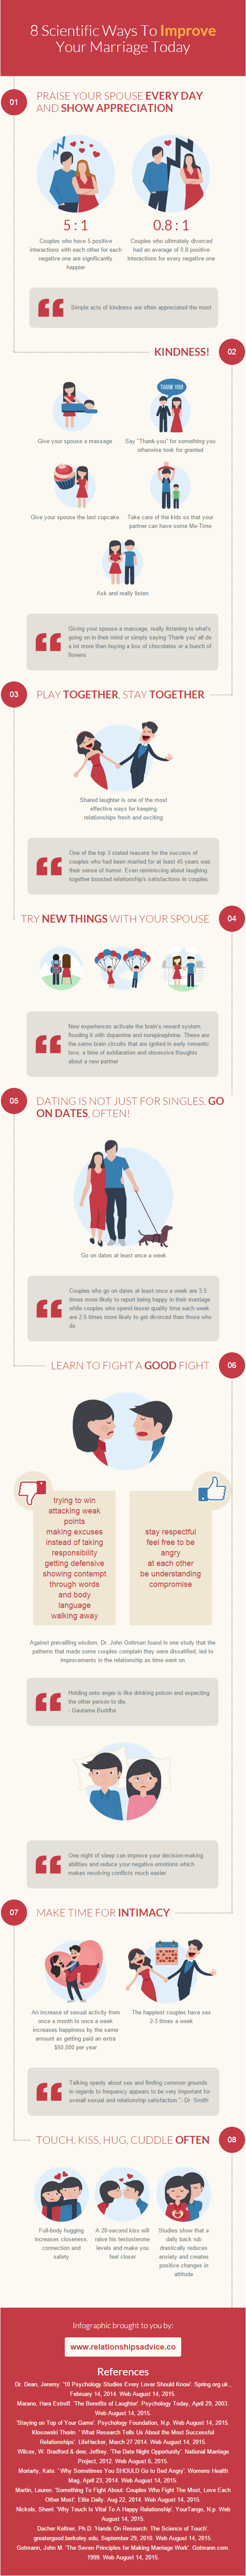 8 Scientific Ways to Improve Your Marriage Today